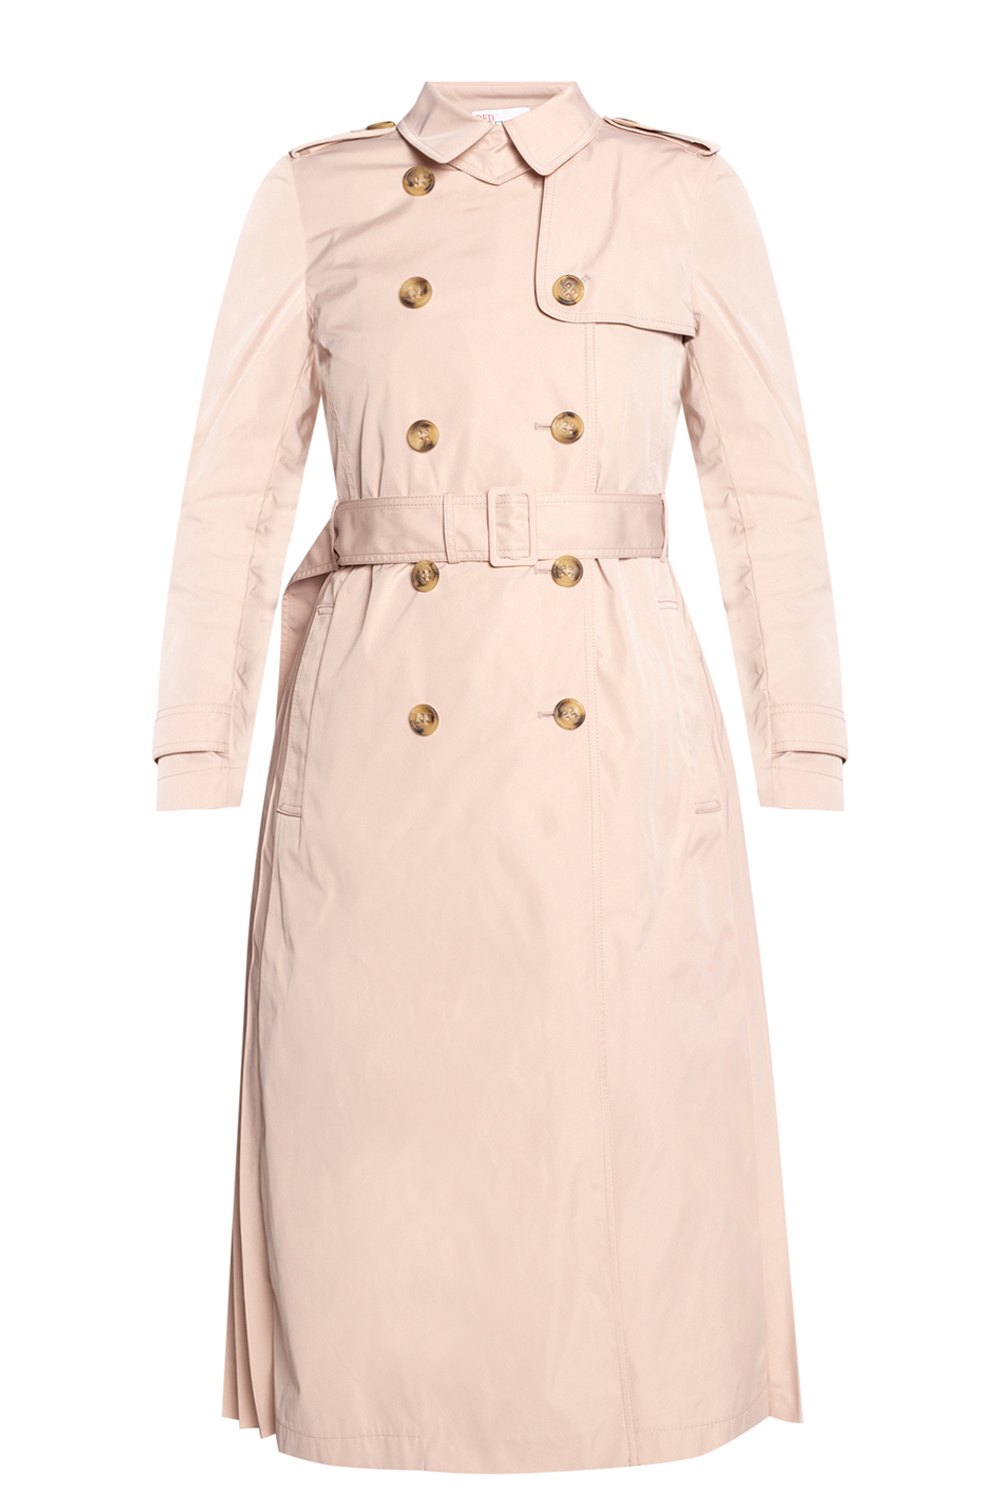 REDValentino Pleated Leather Trench Coat - Trench for Women